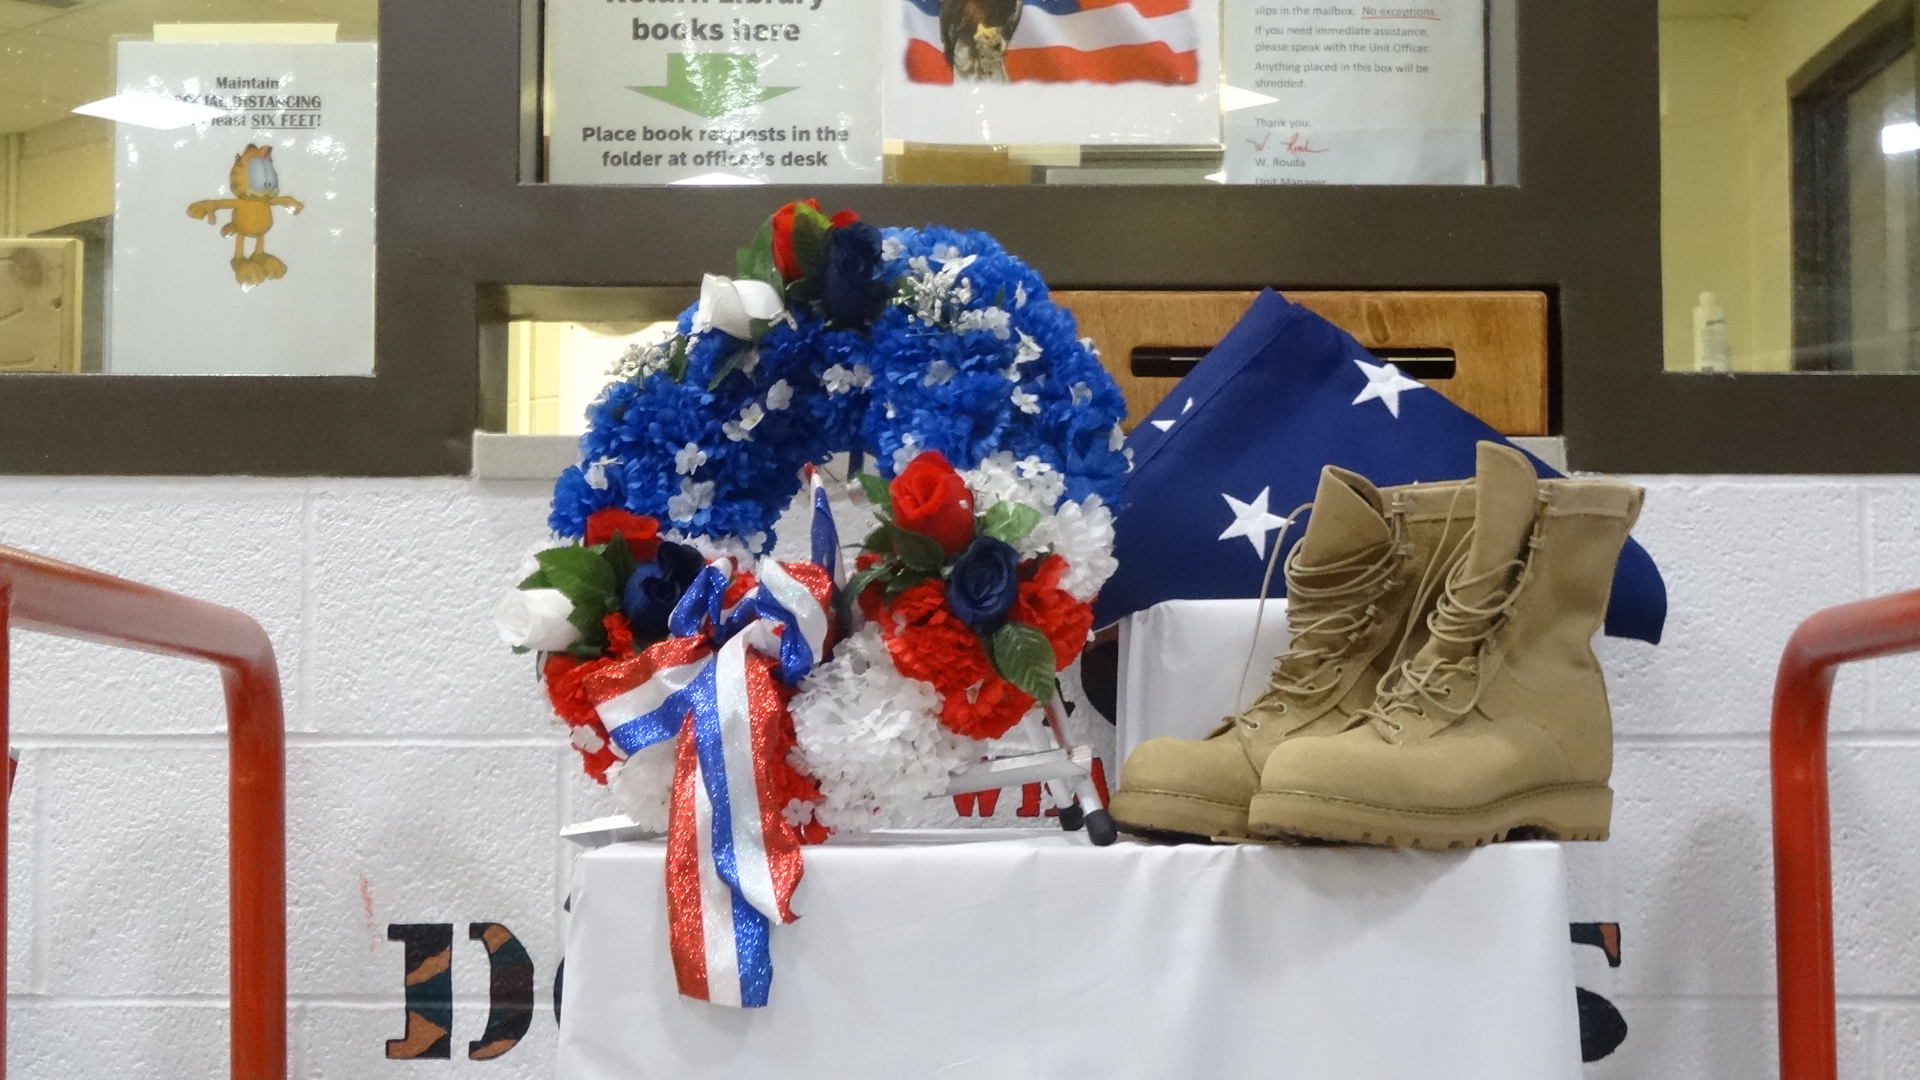 A memorial featuring a wreath and boots in a memorial day service